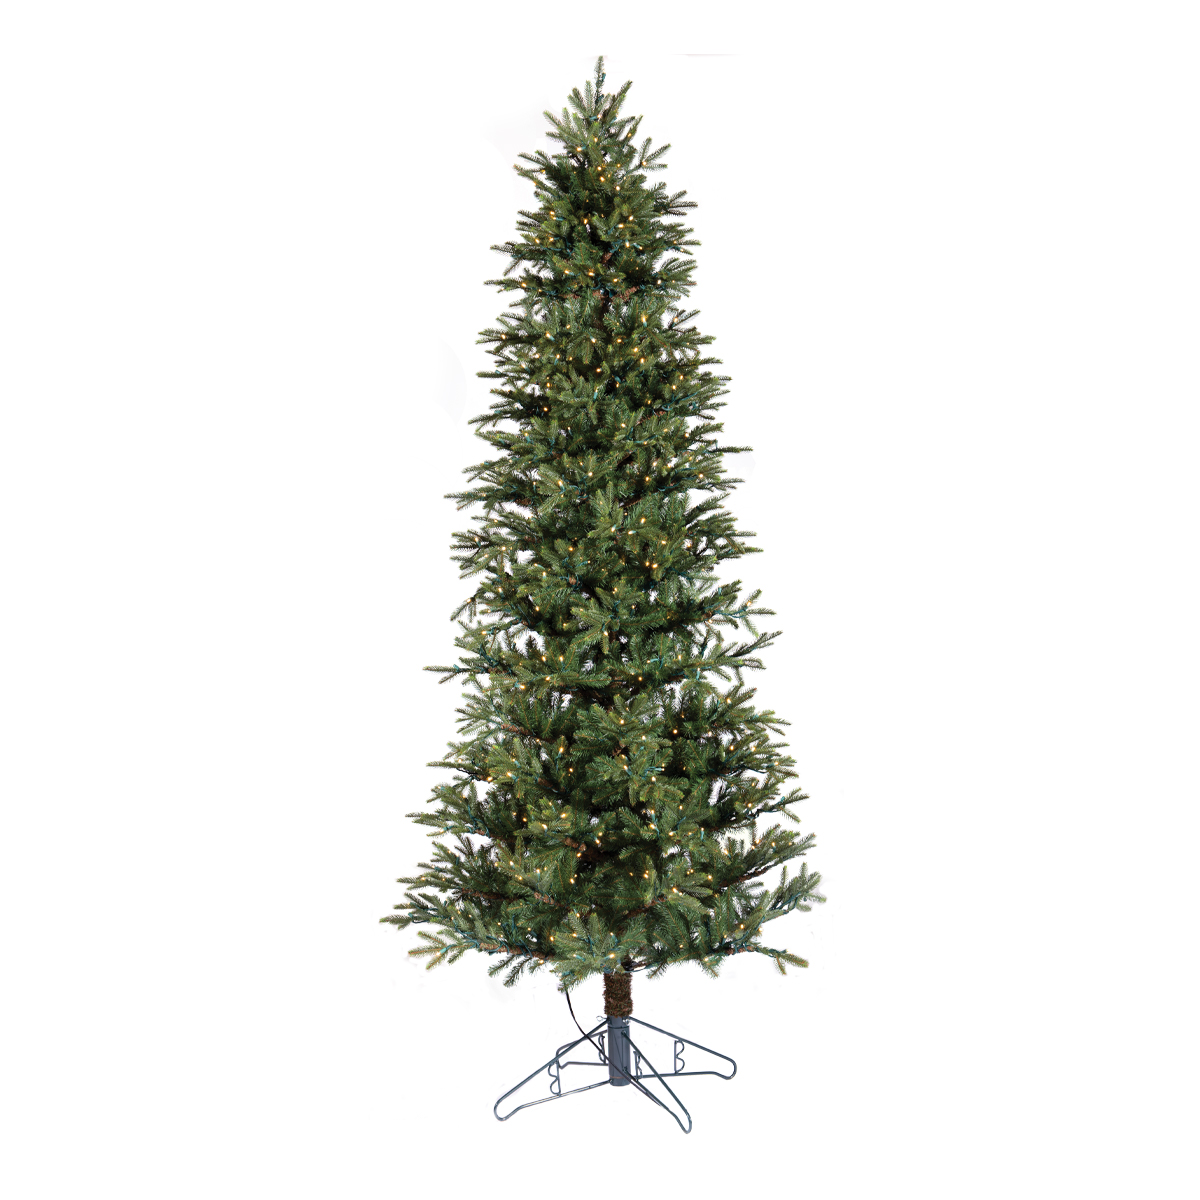 Alaskan Deluxe Christmas Tree - Pencil Frame - Warm White LED Lights - One-Plug Pole Power Supply - 10ft Tall